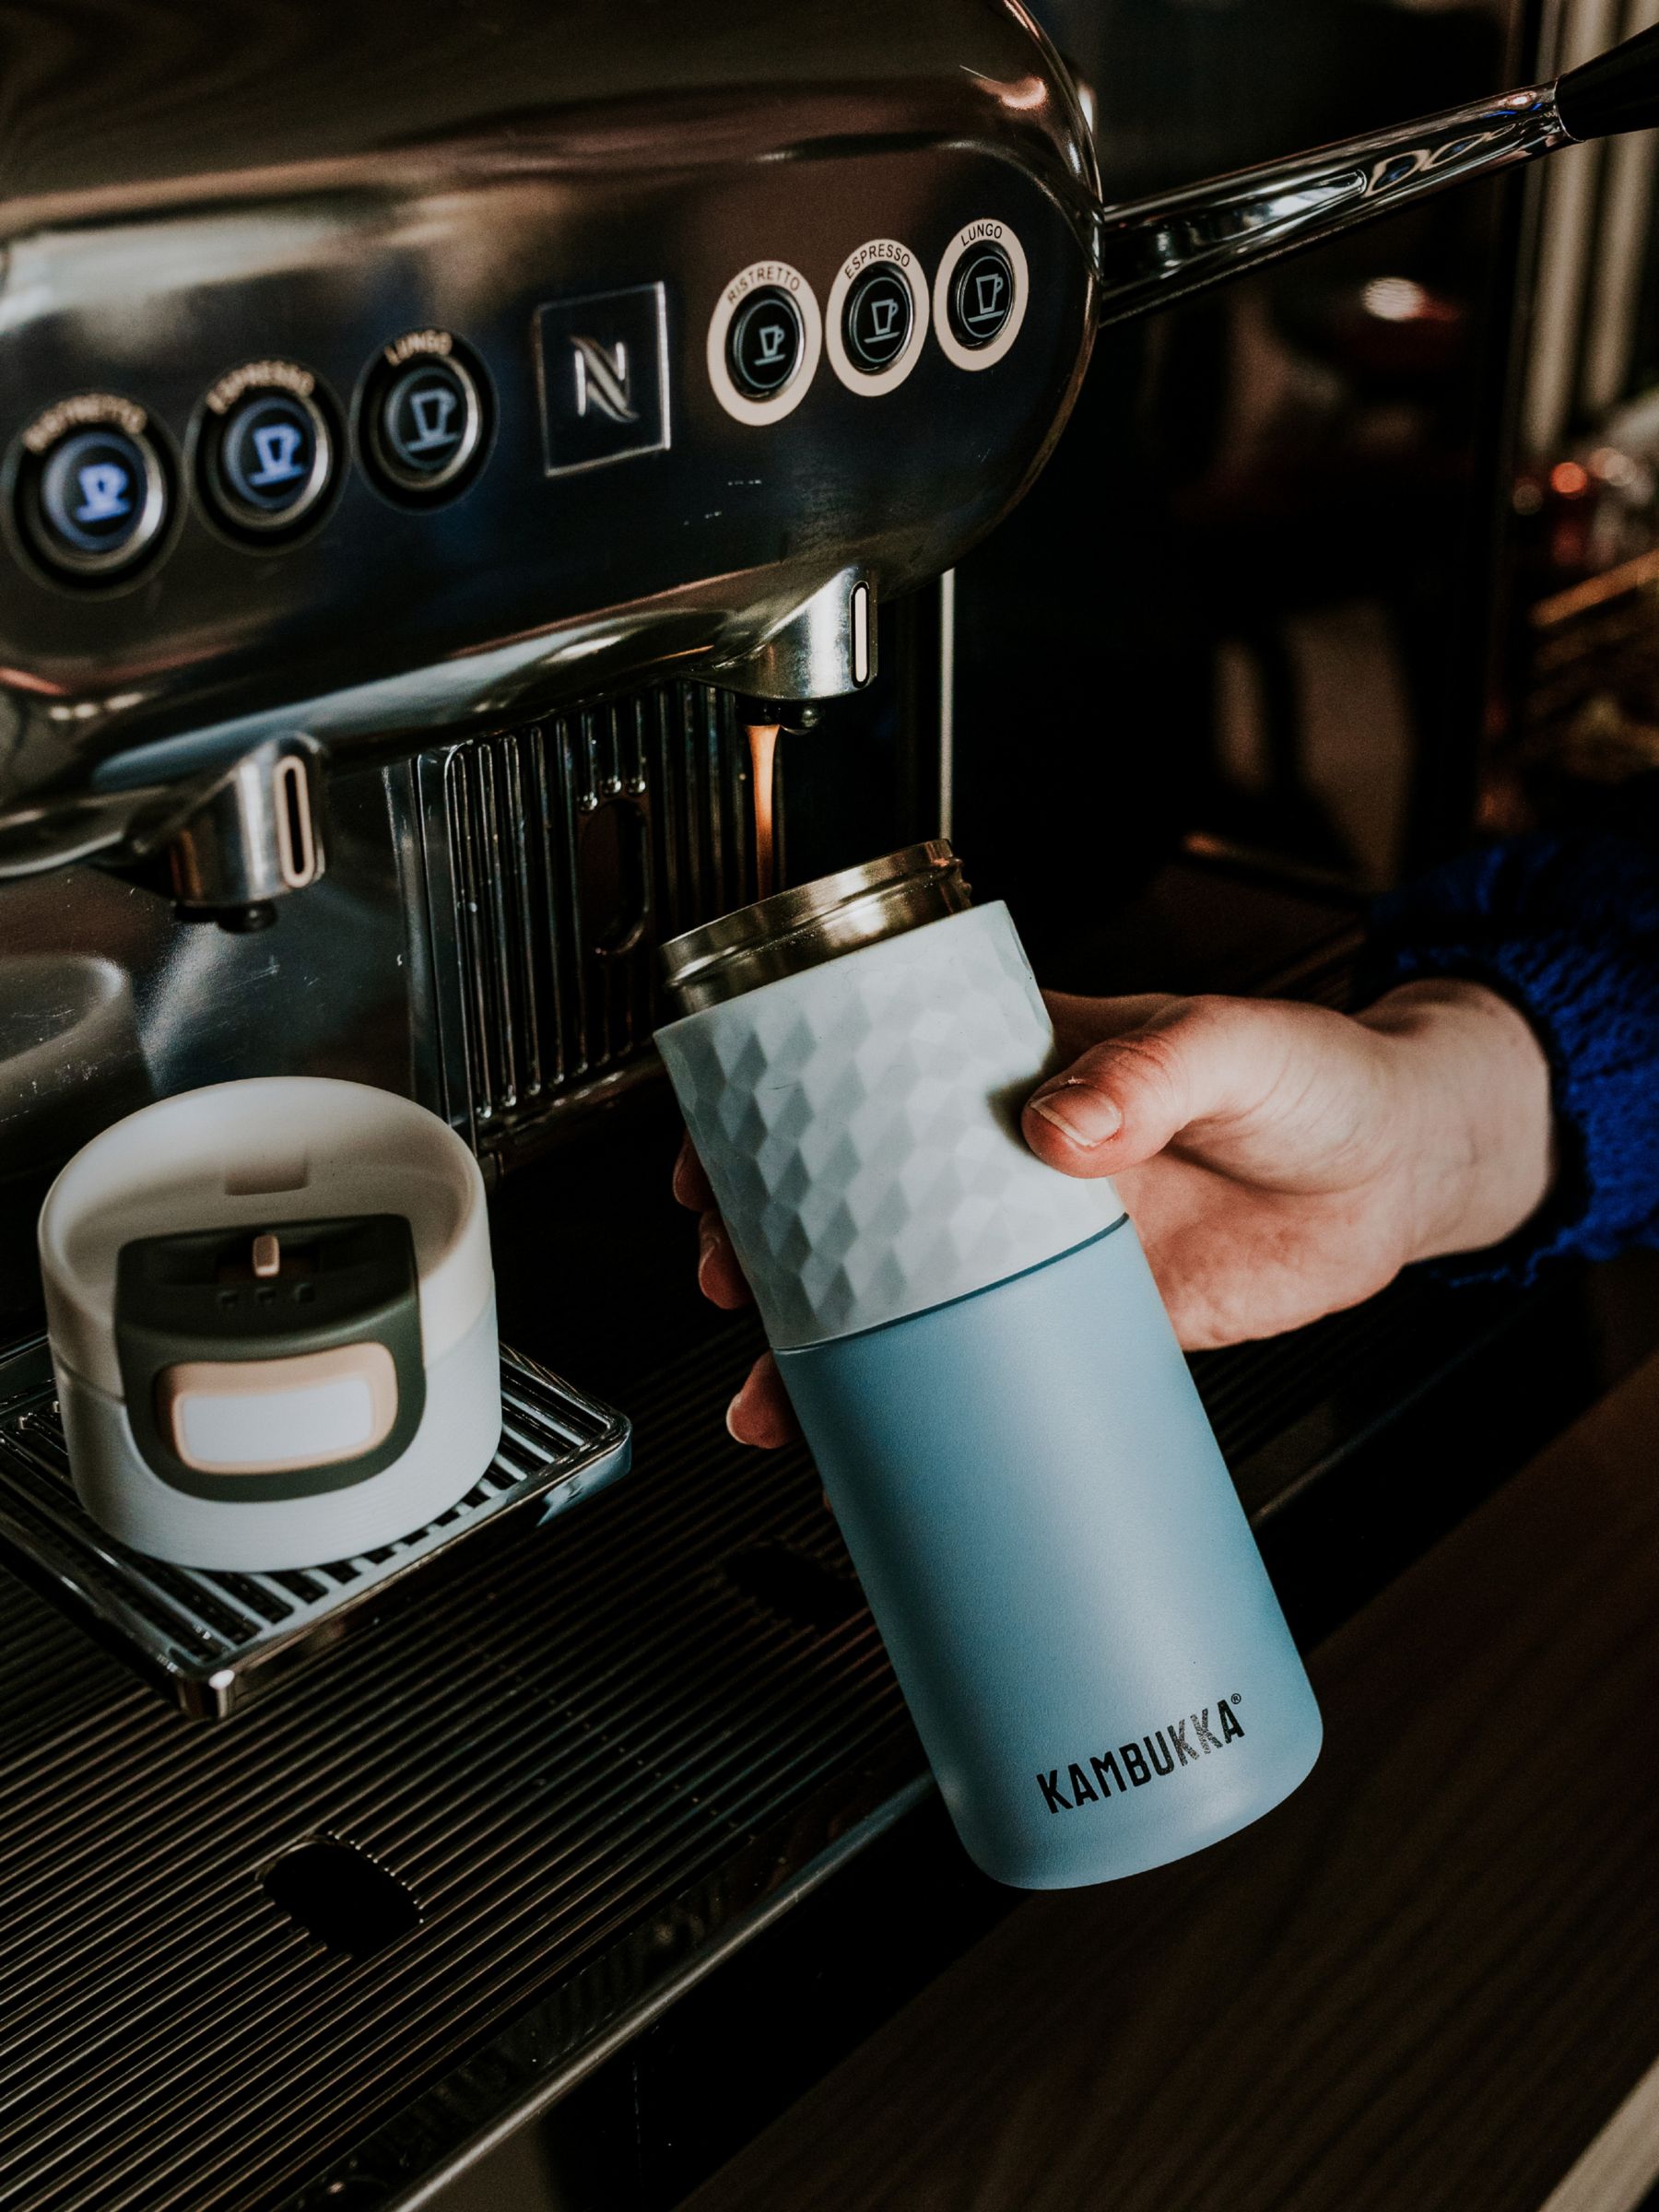  Kambukka - Thermal Mug 500 ml - Model ETNA Denim Blue - Thermal  Mug/Coffee Mug to Go: Easy Cleaning - Stainless Steel Keeps Drinks Hot or  Cold for Hours: Home & Kitchen